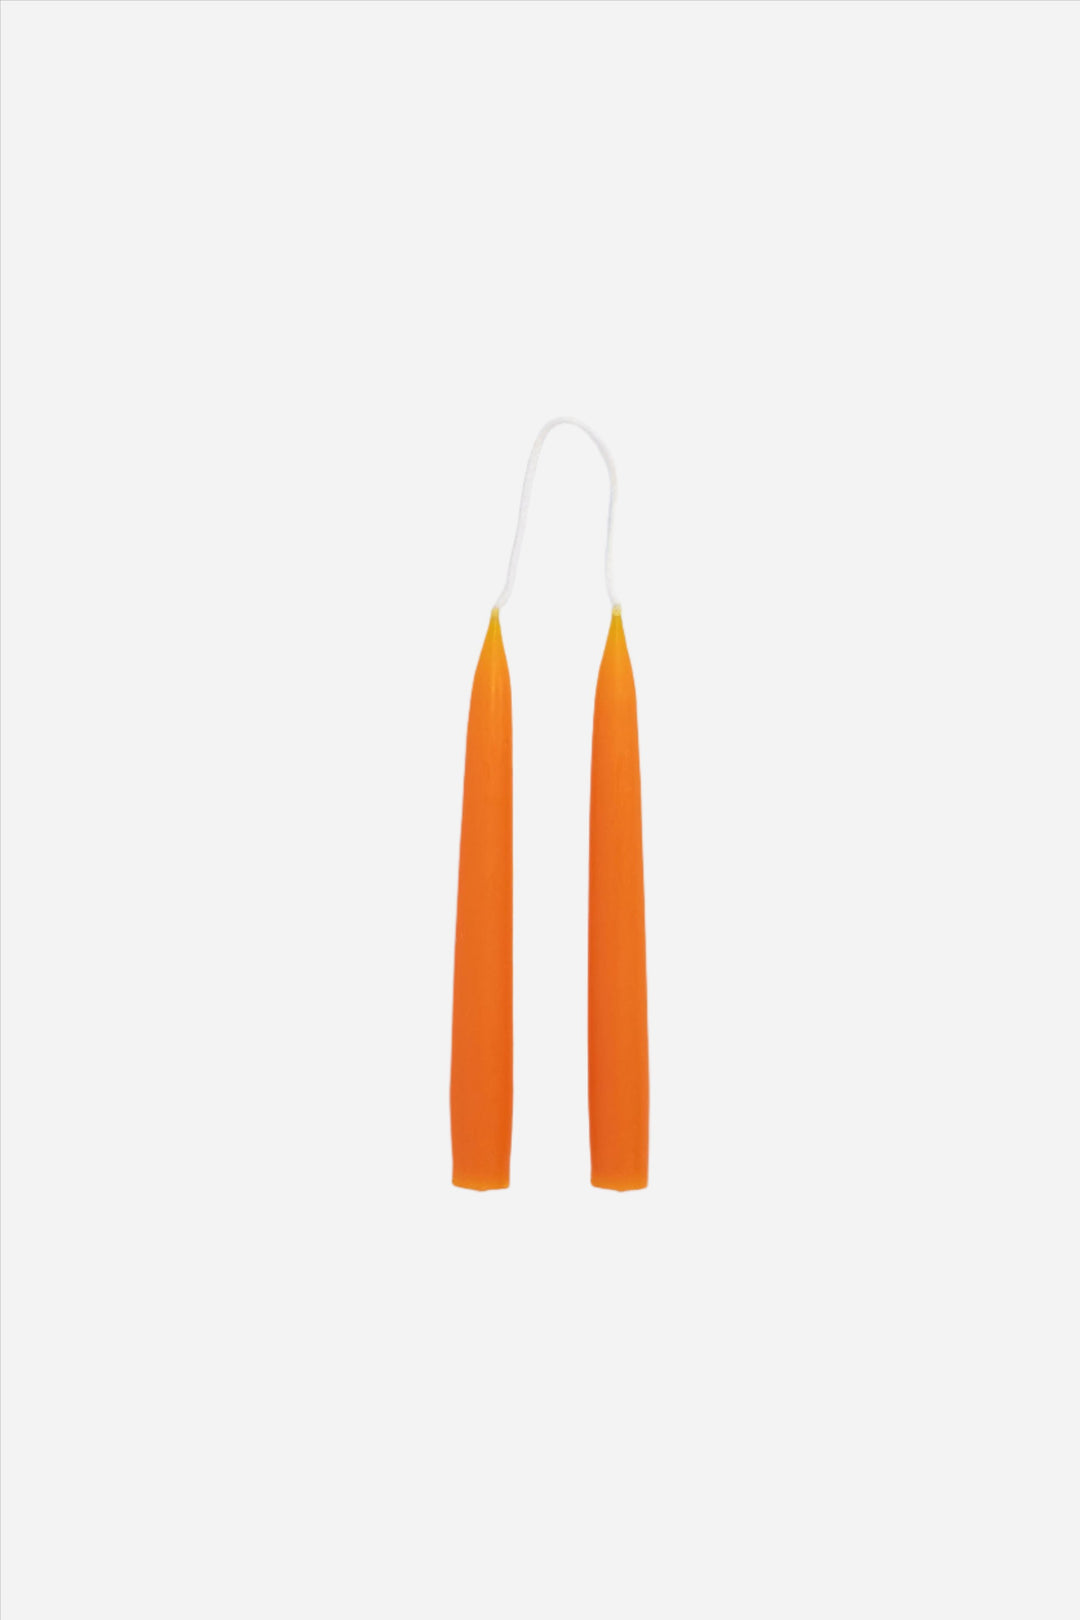 Small Pair of Candles / Orange